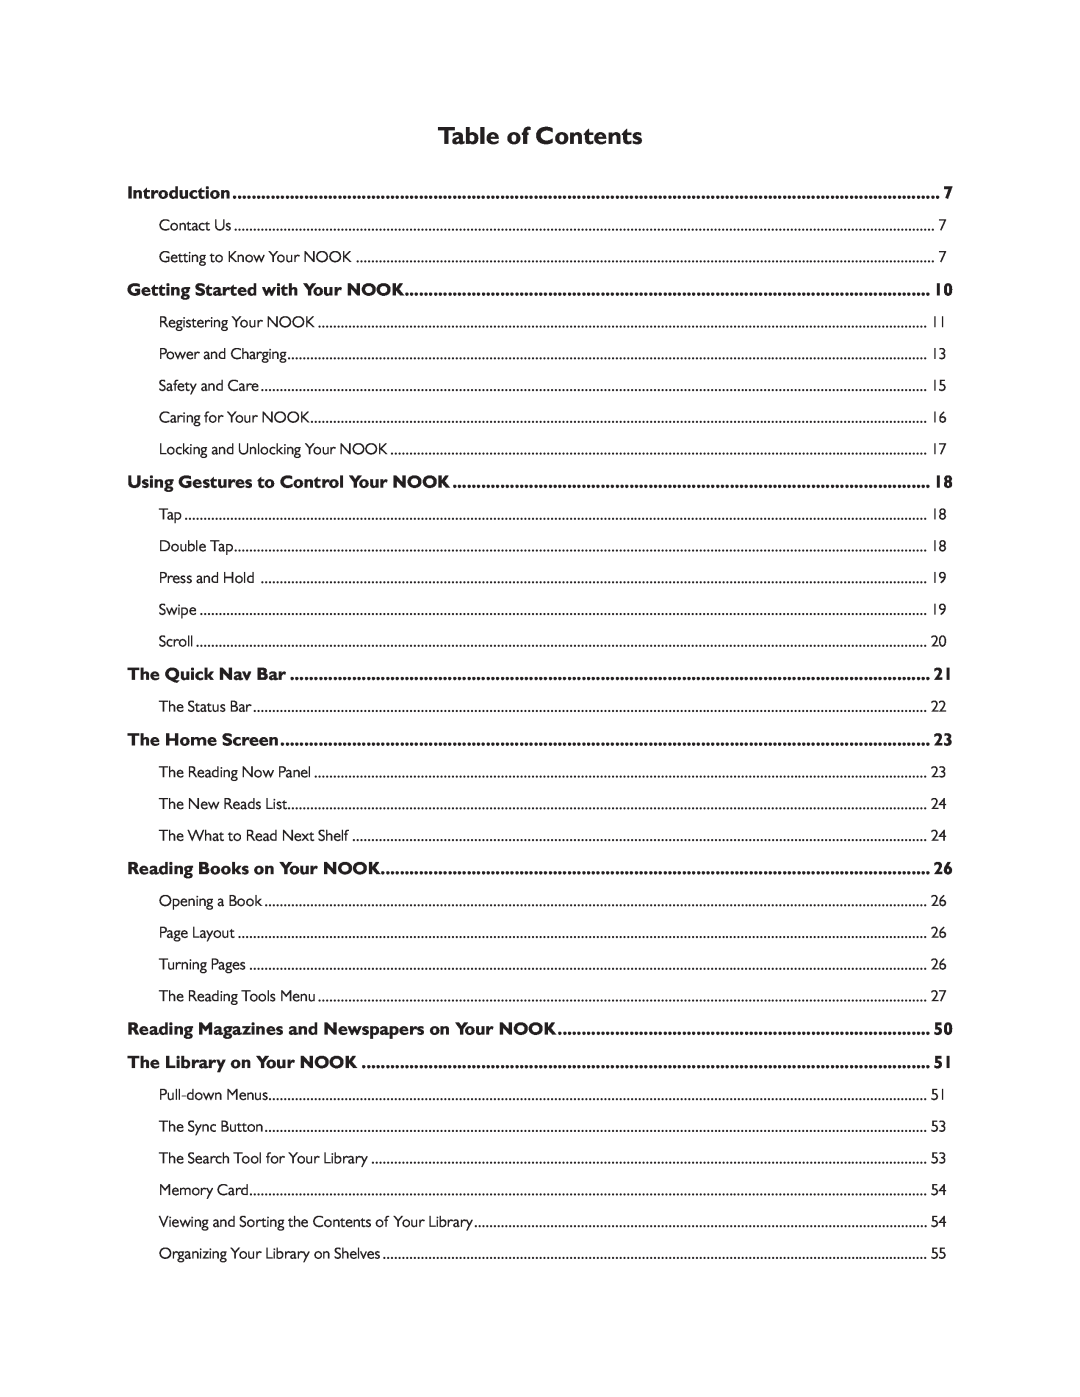 Barnes & Noble BNRV300 Table of Contents, Introduction, Getting Started with Your NOOK, The Quick Nav Bar, The Home Screen 